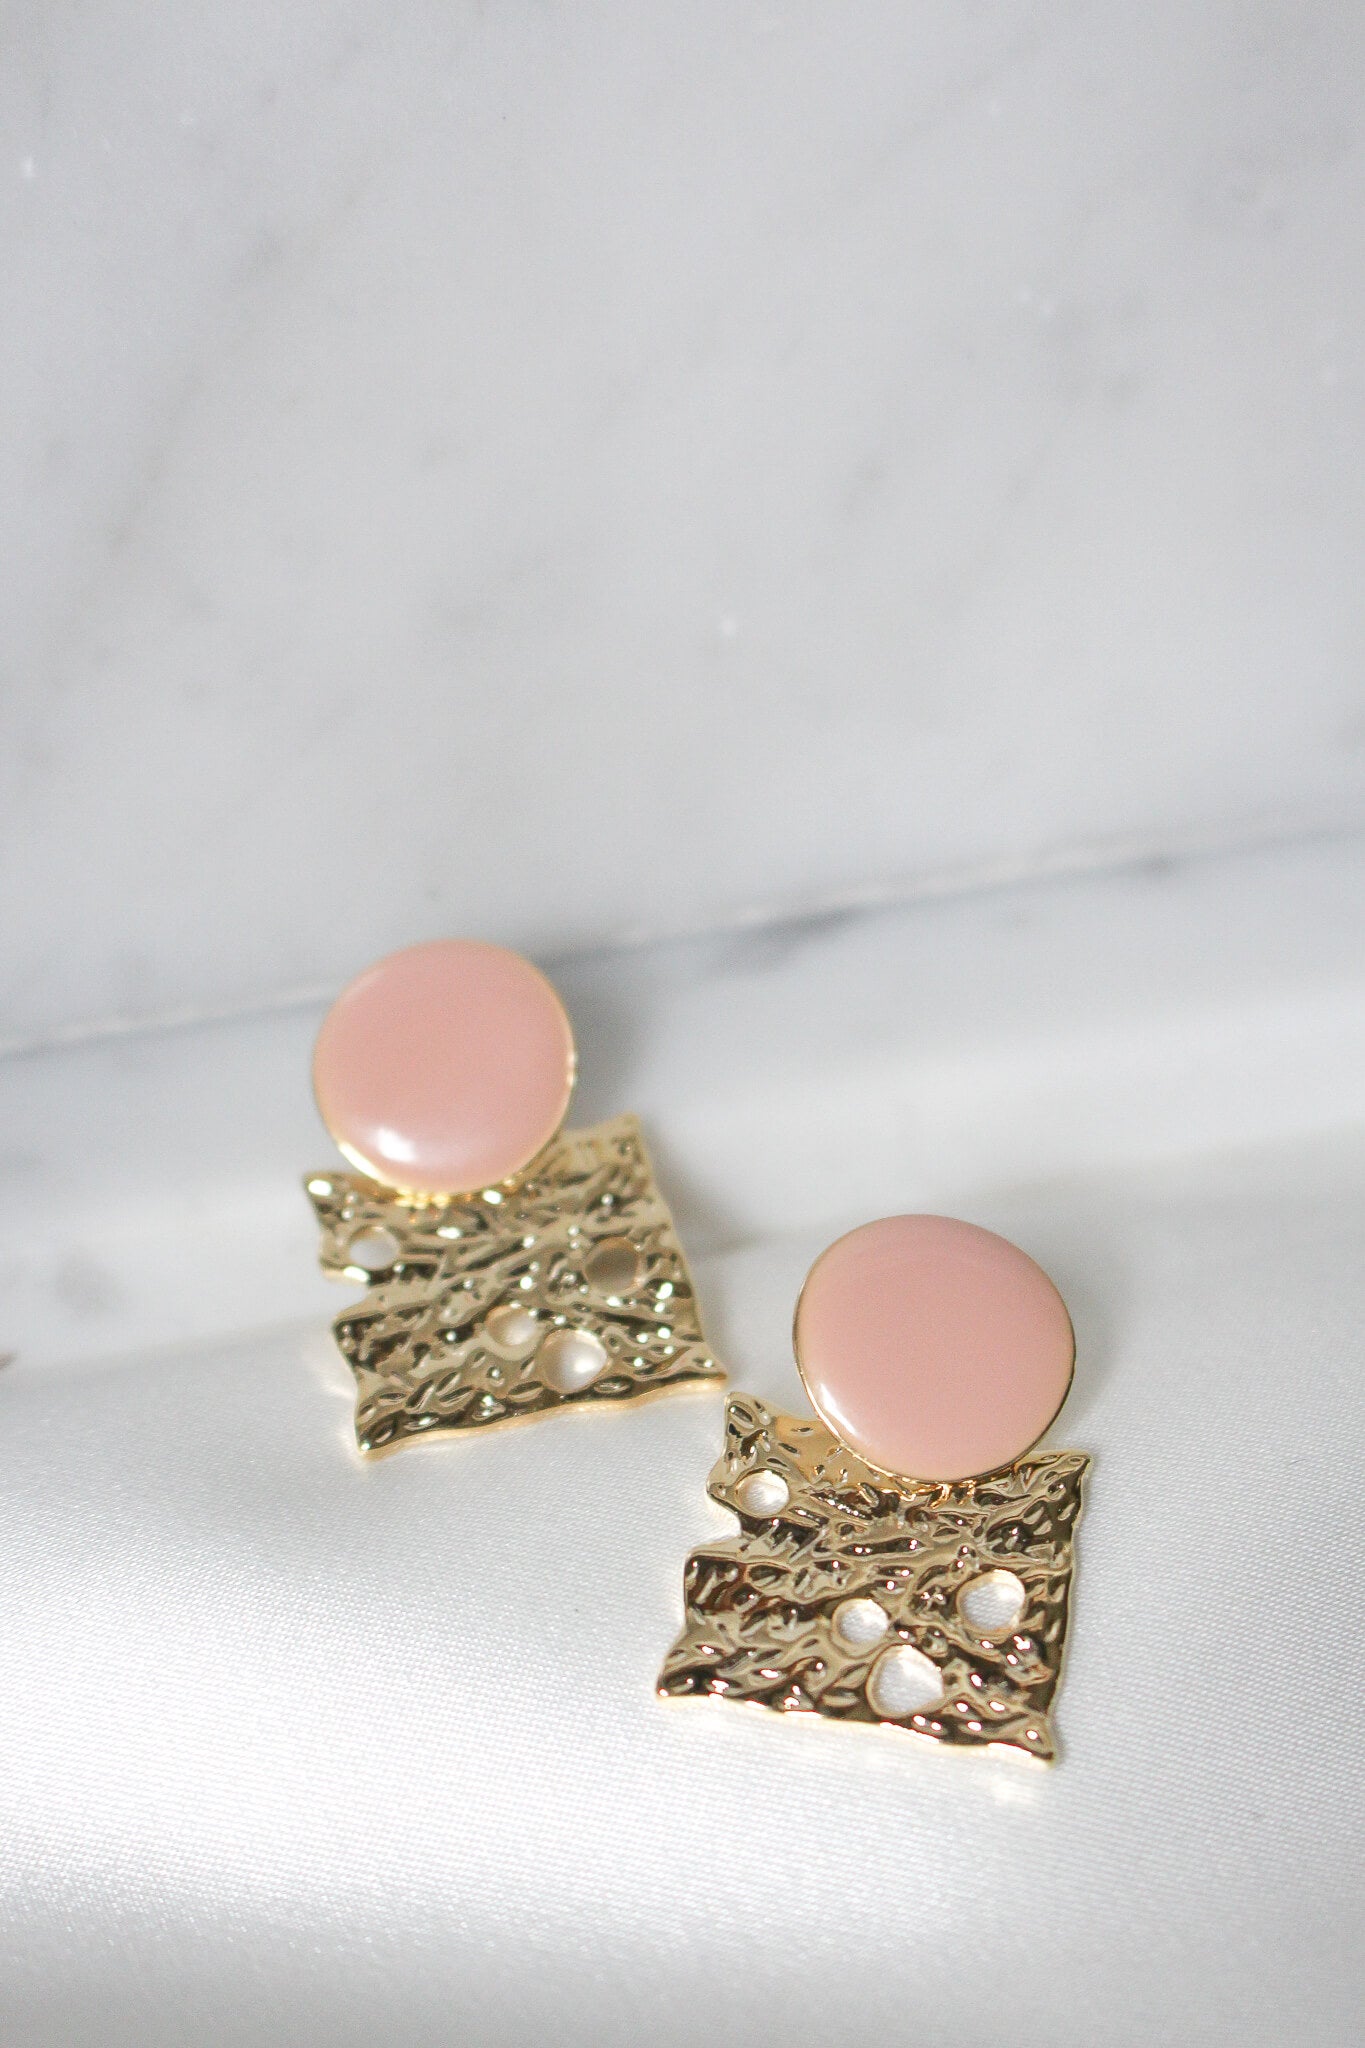 Gold and peach pink earrings, looks like cheese.